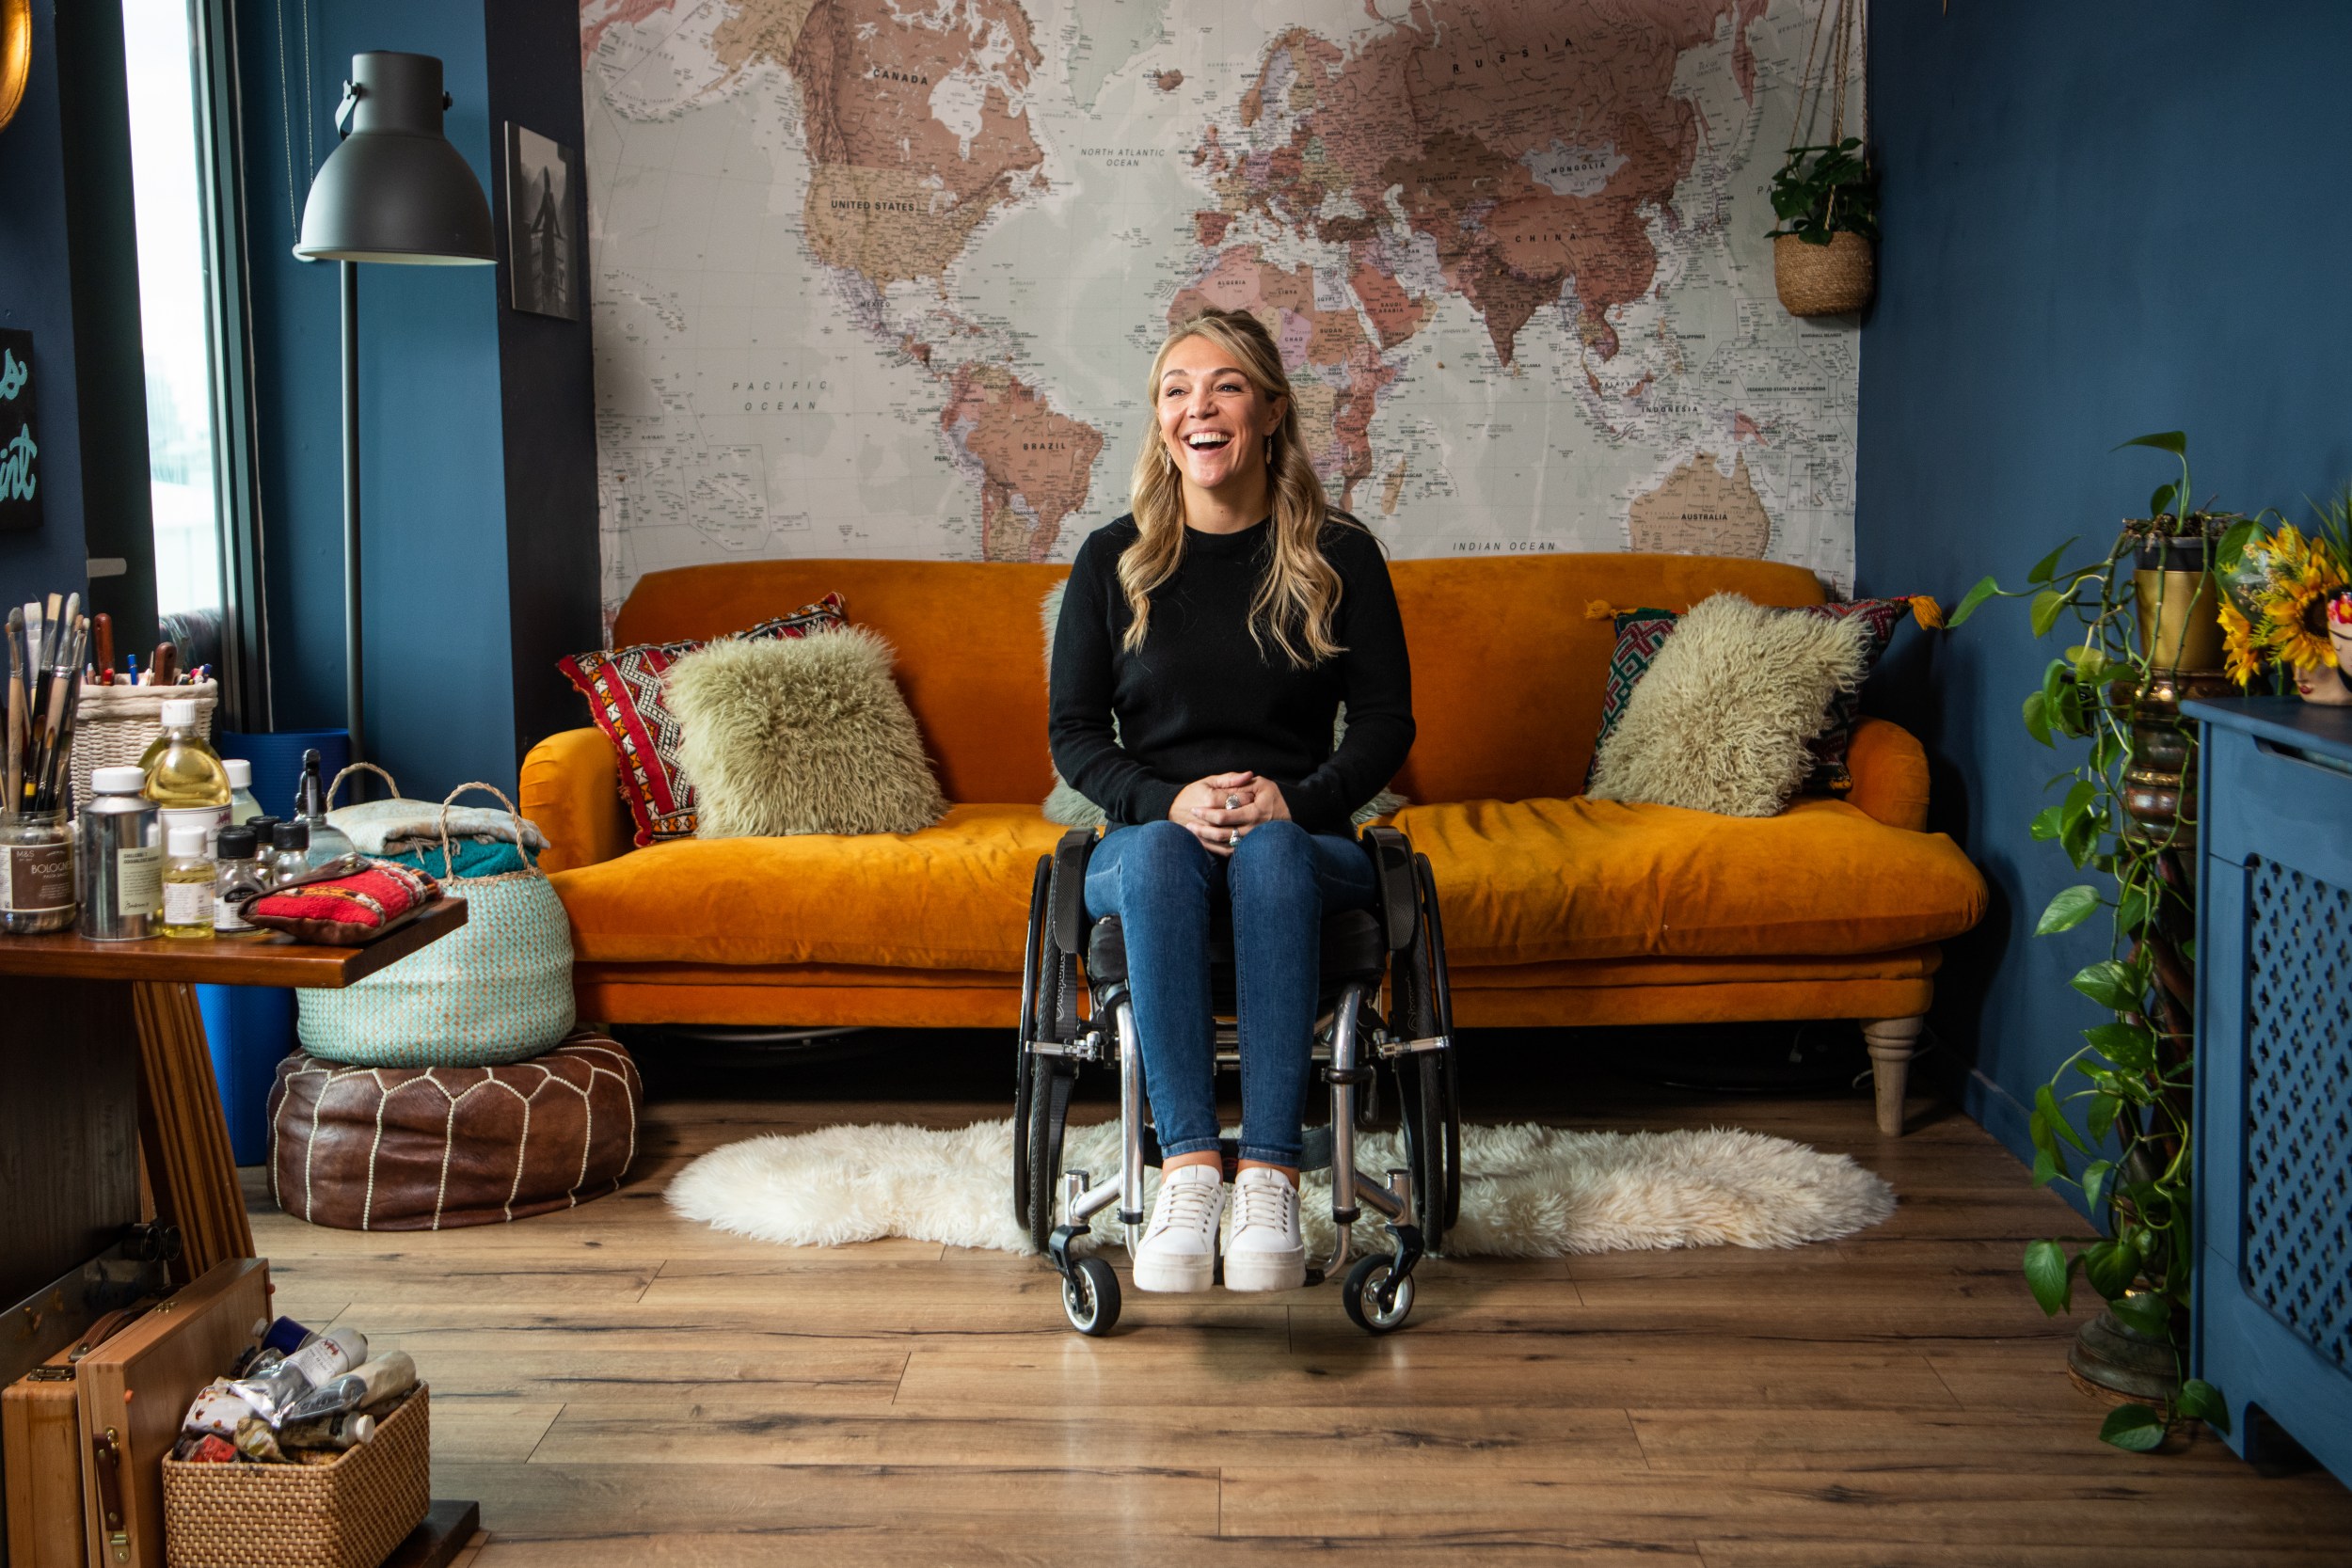 Sophie Morgan sits in the living room of the home she is listing on Airbnb's Adapted Category. Her London listing has been custom-adapted with accessibility features that make it suitable for wheelchair use.